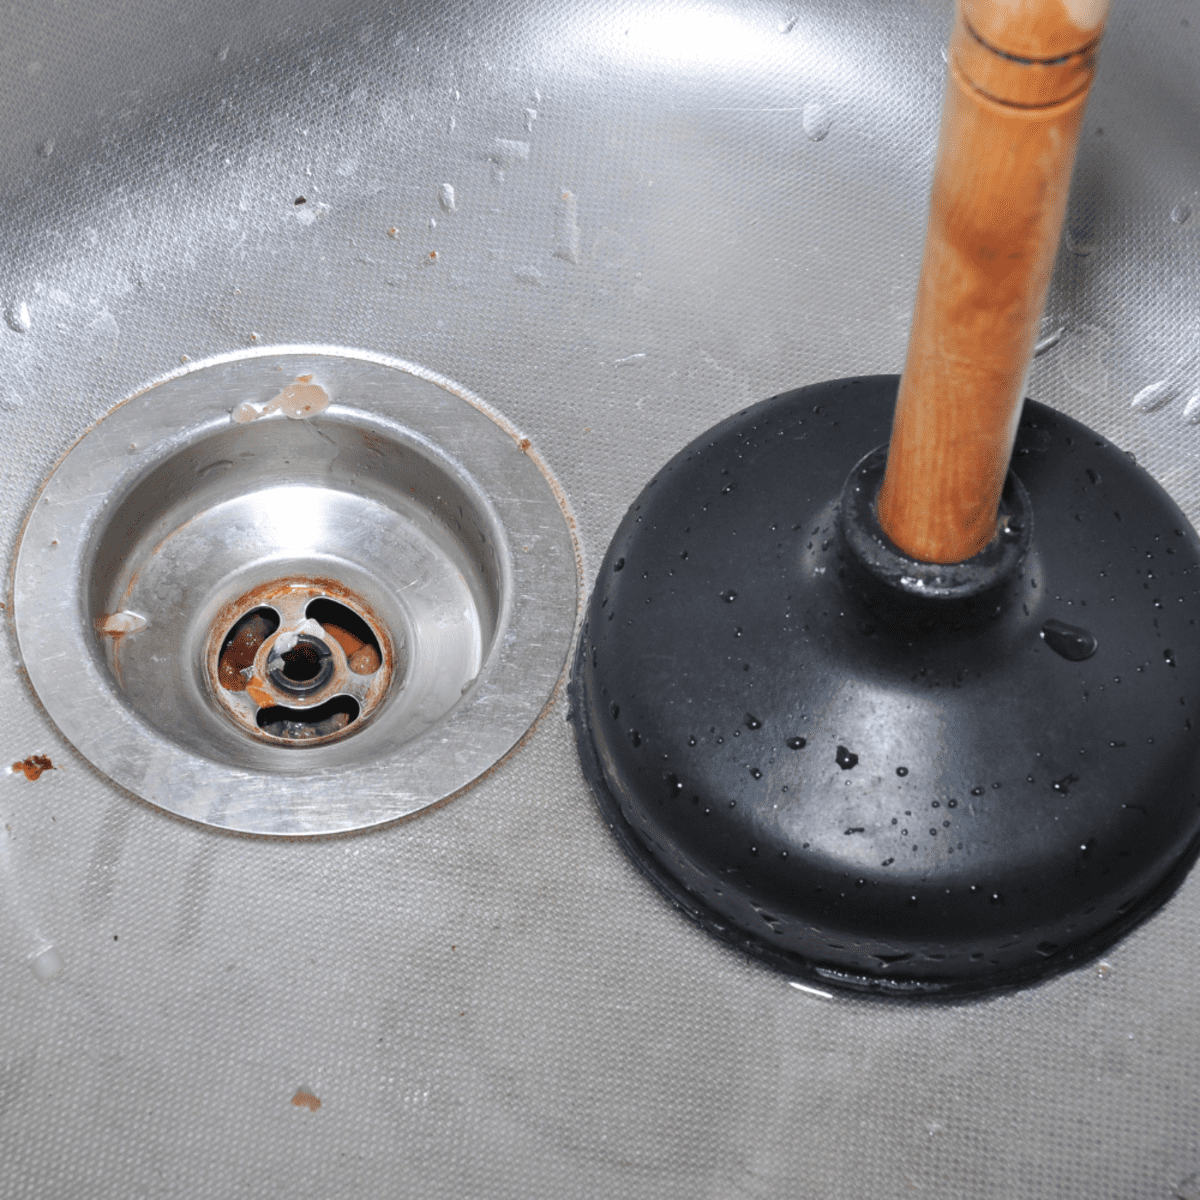 How to Unclog a Drain? - Its Causes & Home Remedies!